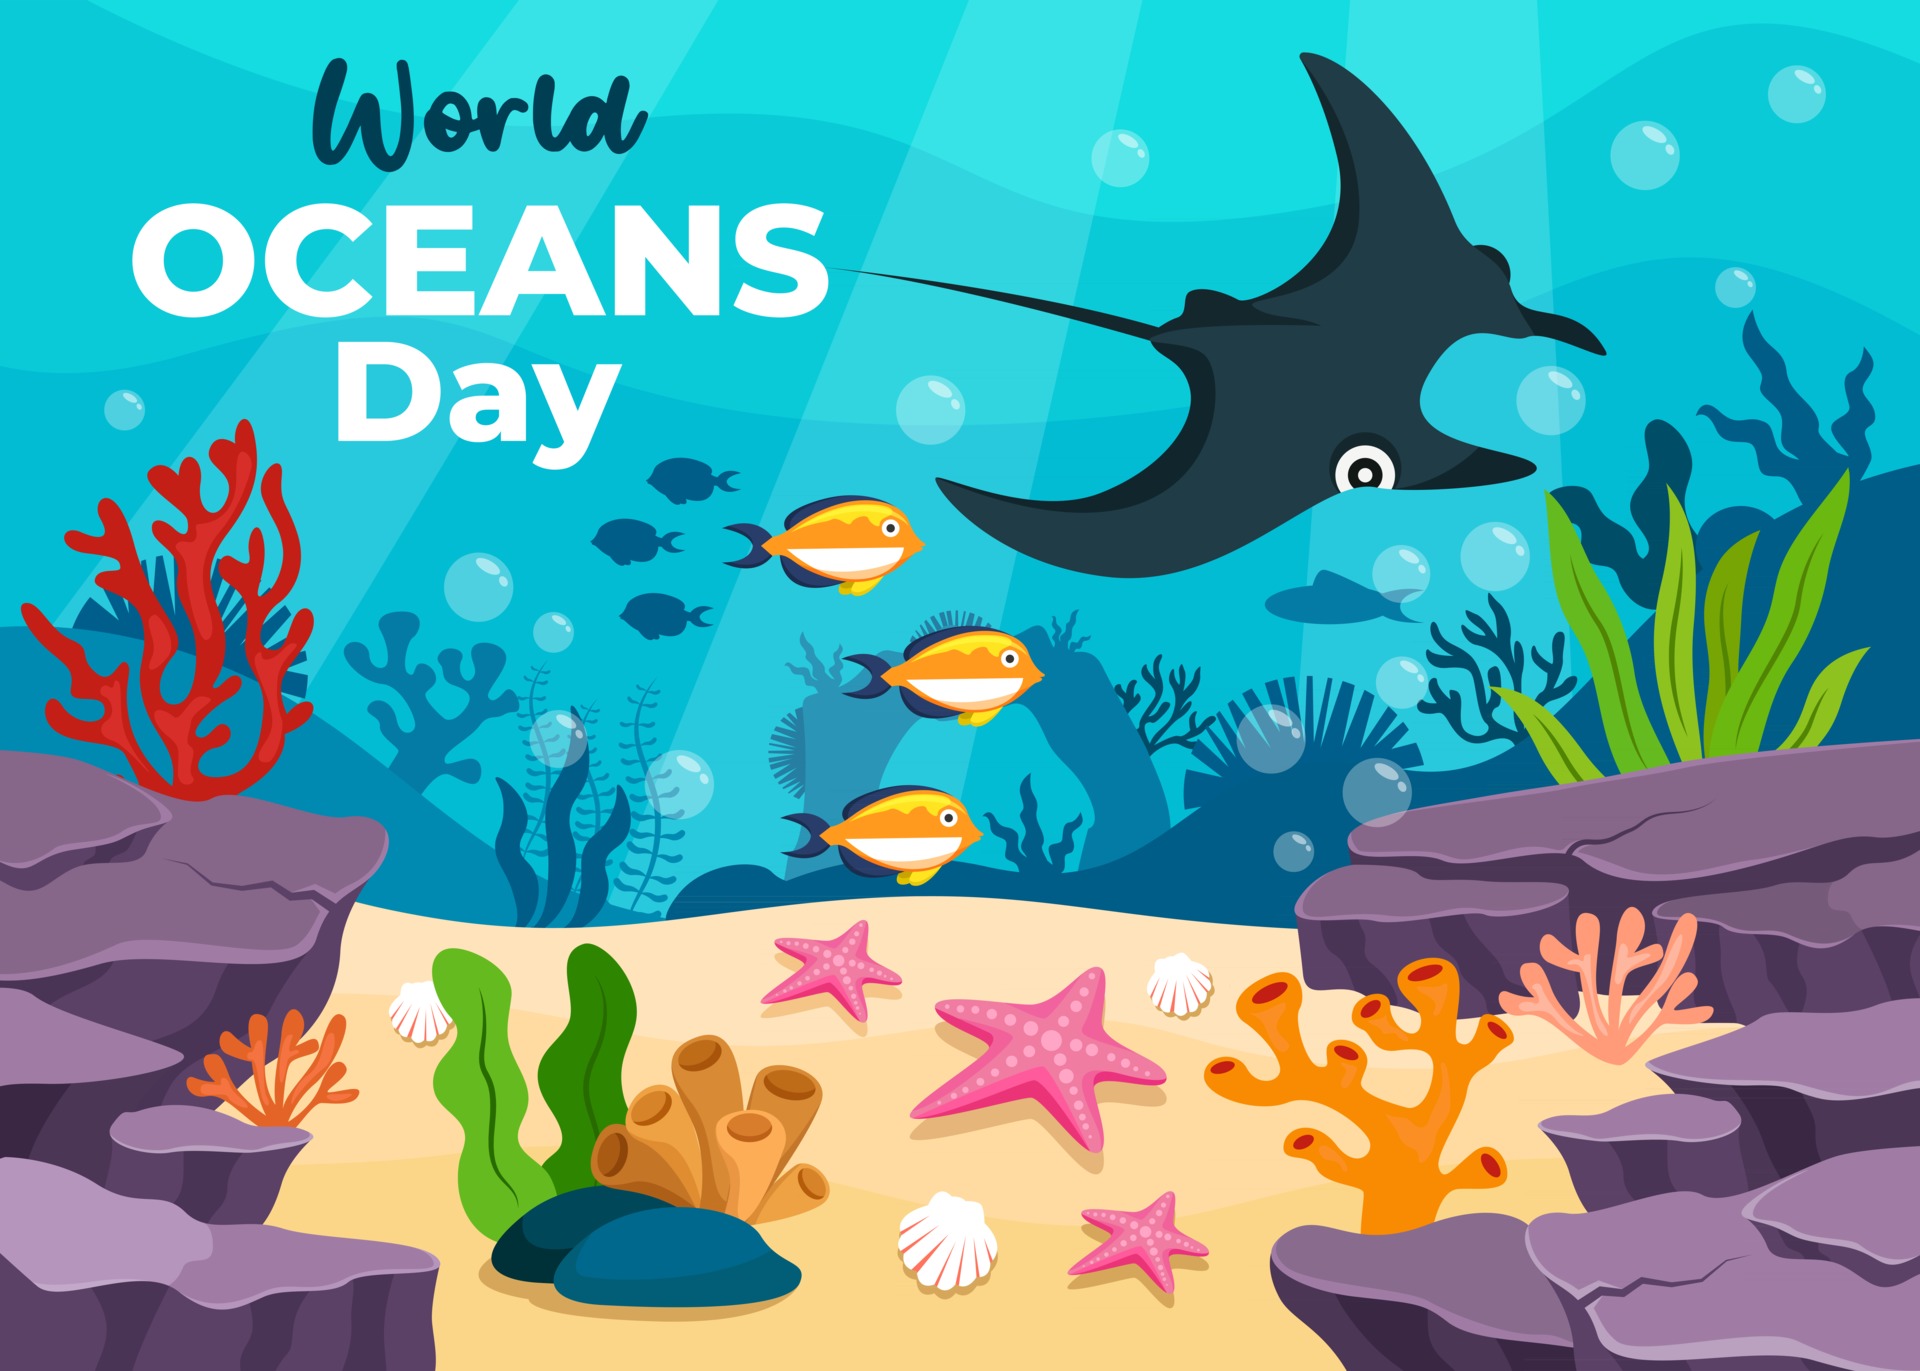 World Ocean Day Drawing  World Ocean Day Poster  World Ocean Day Drawing  Easy  World Ocean Day  YouTube